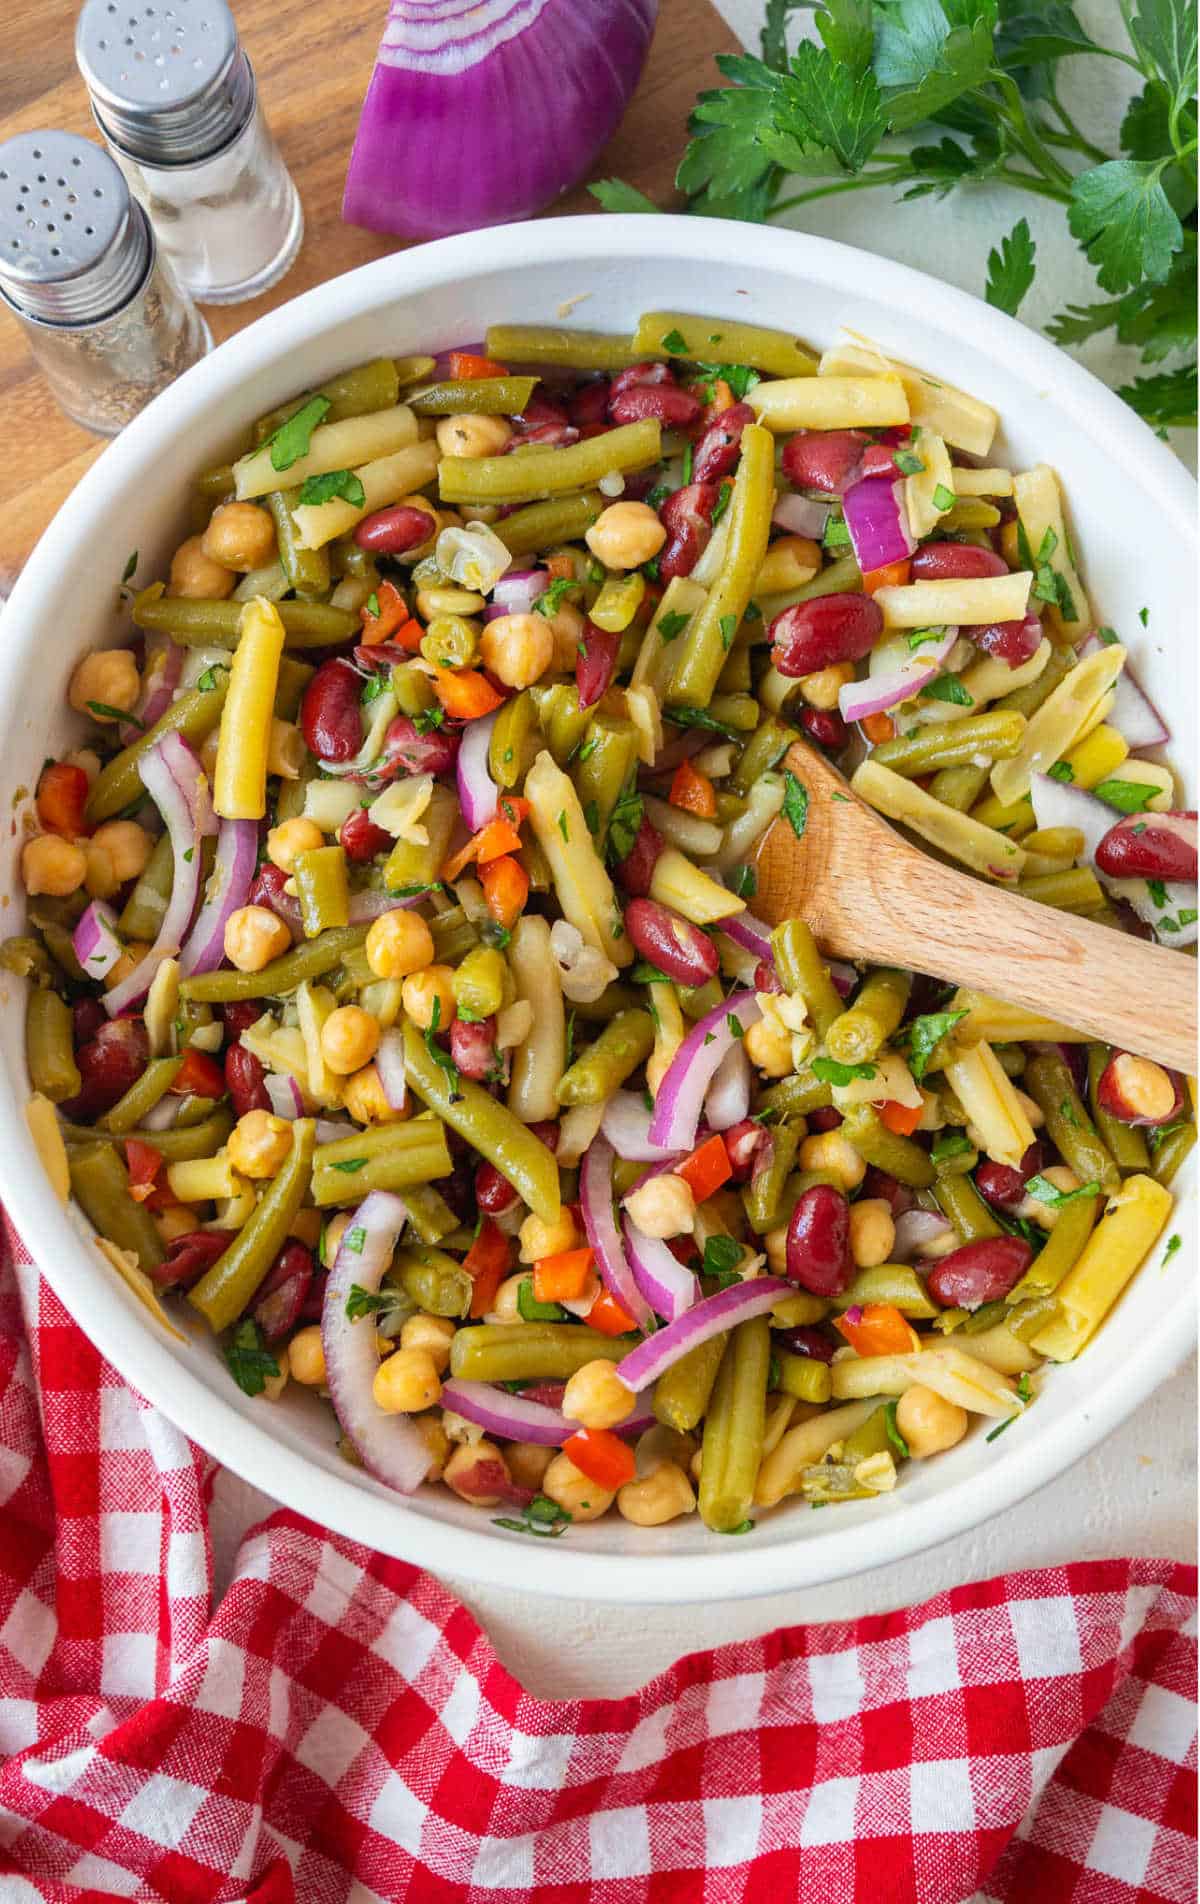 A large bowl of four bean salad with a wooden spoon.